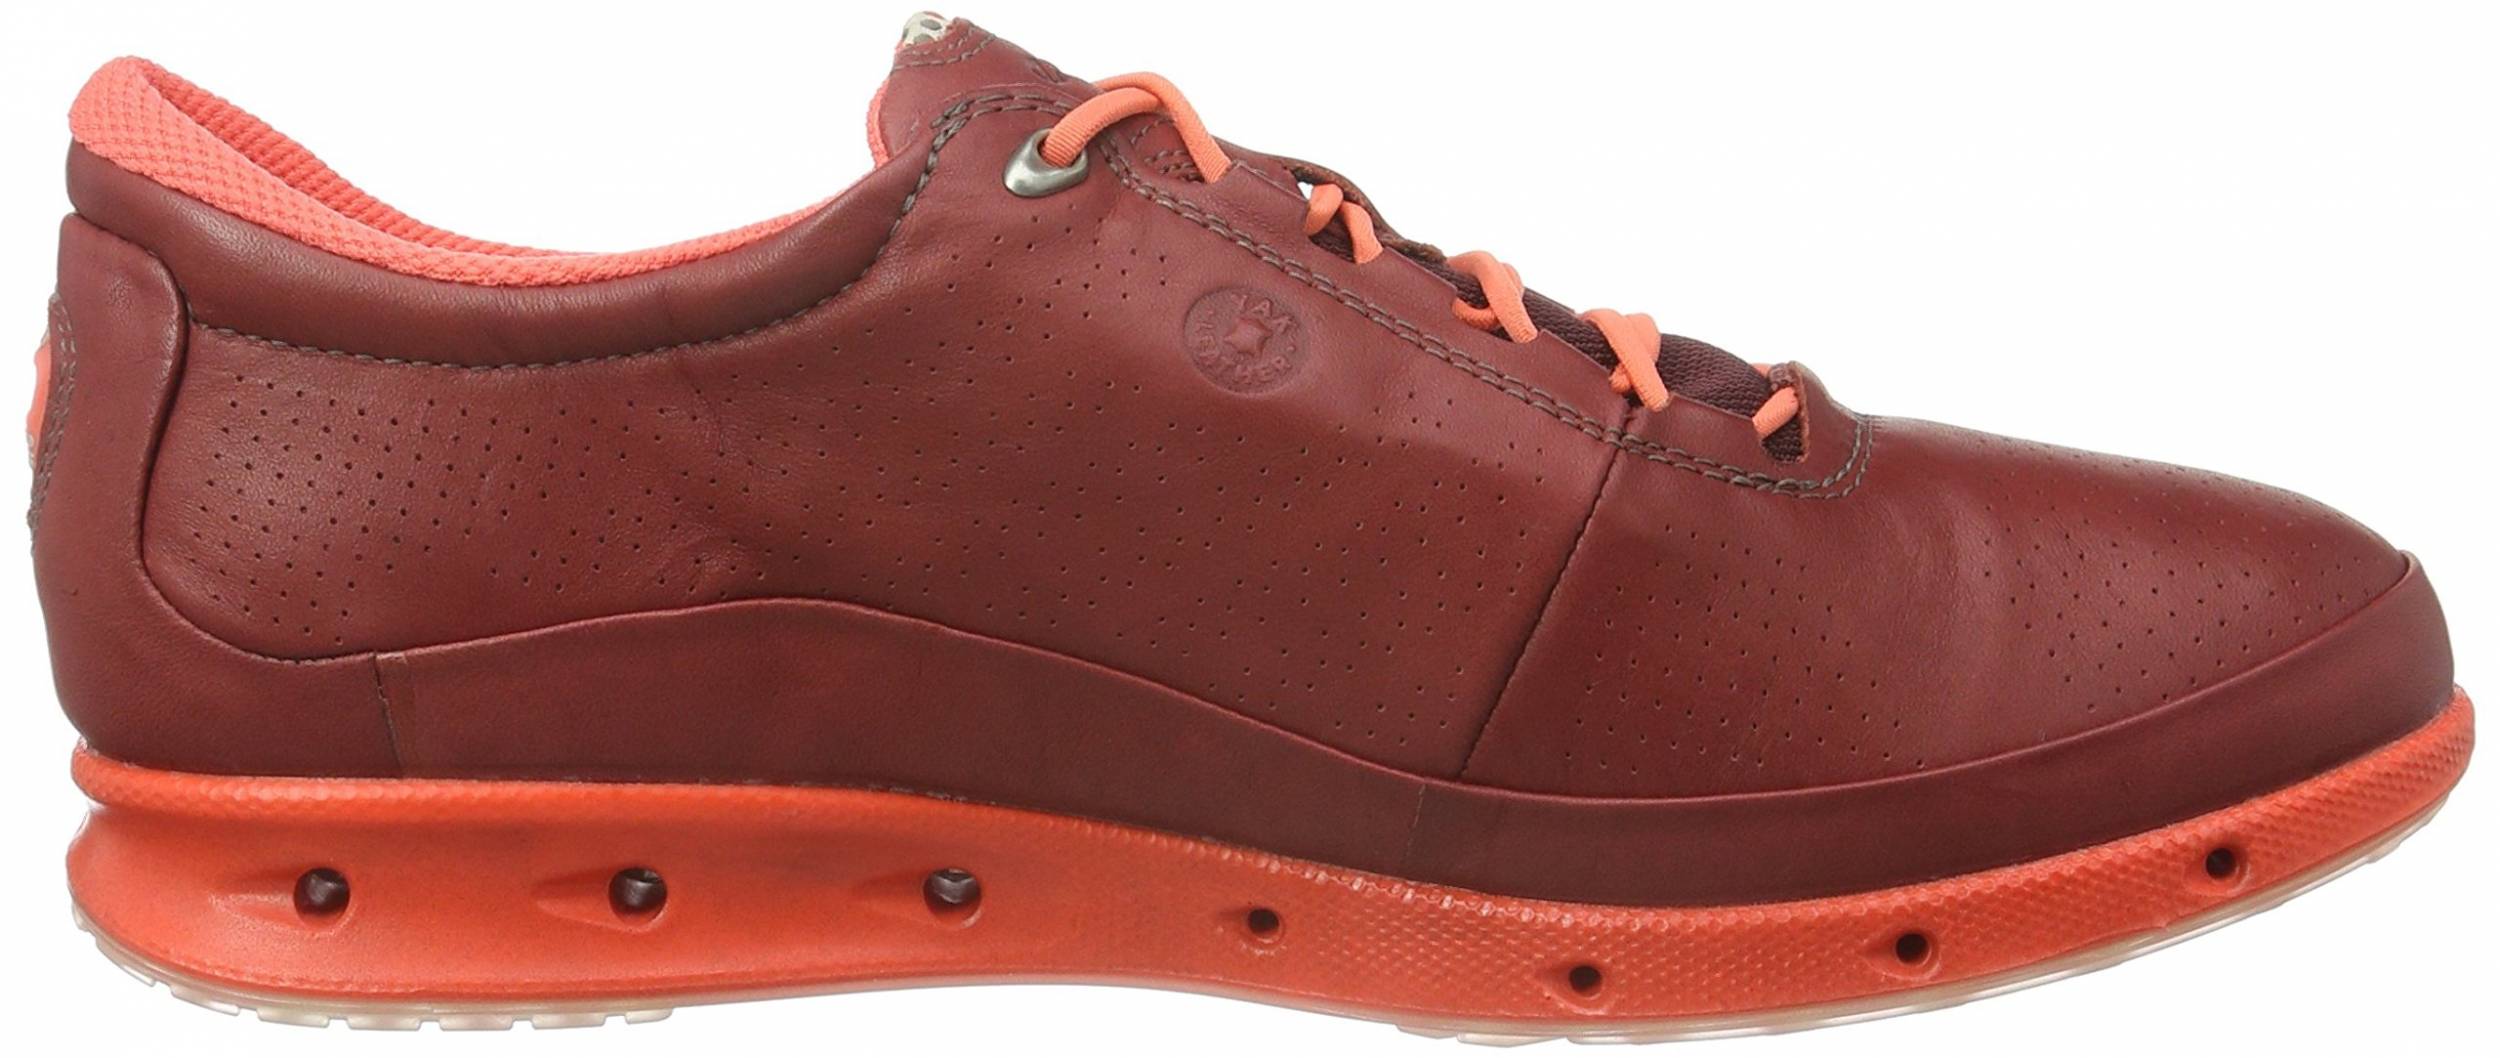 Only $180 + Review of Ecco Cool GTX 